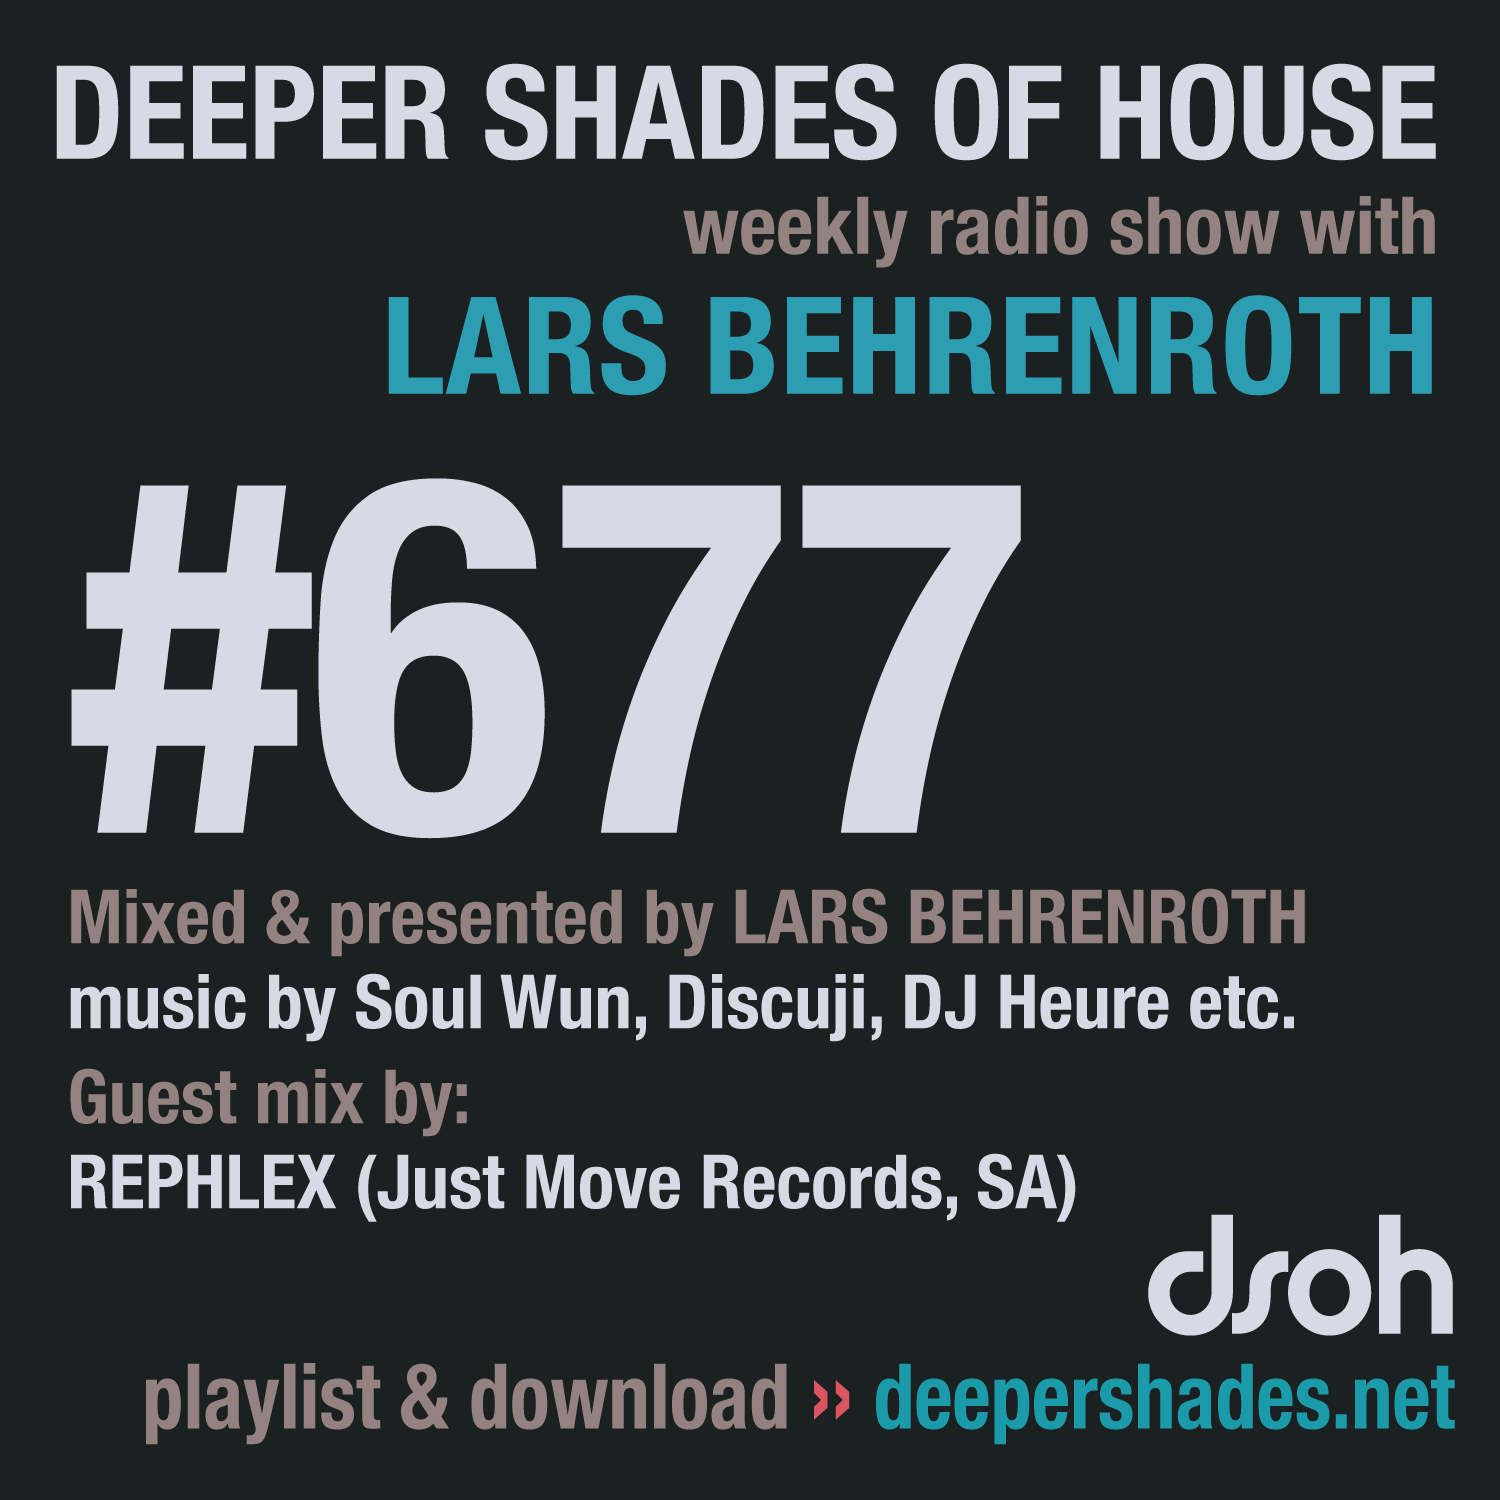 Deeper Shades Of House 677